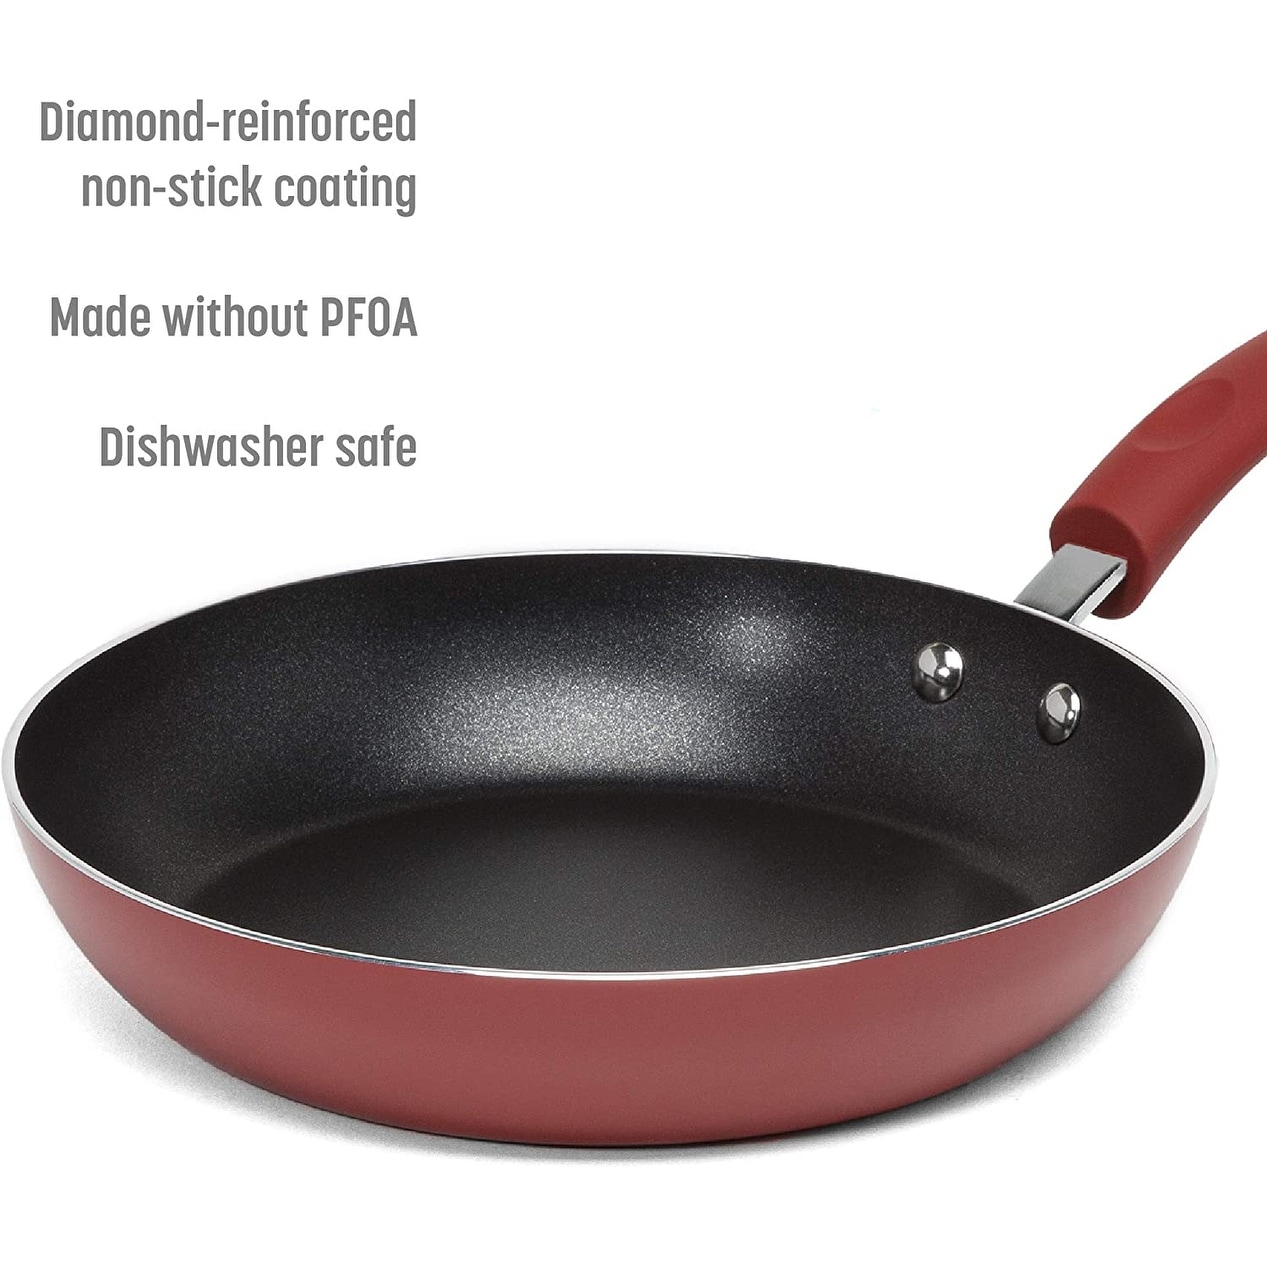 https://ak1.ostkcdn.com/images/products/is/images/direct/e273629afcfa12a991e256d4bd8cde4180c5ac28/Goodful-Cookware-Set-with-Premium-Non-Stick-Coating%2C%C2%A0-Tempered-Glass-Steam-Vented-Lids%2C-Stainless-Steel-Steamer.jpg